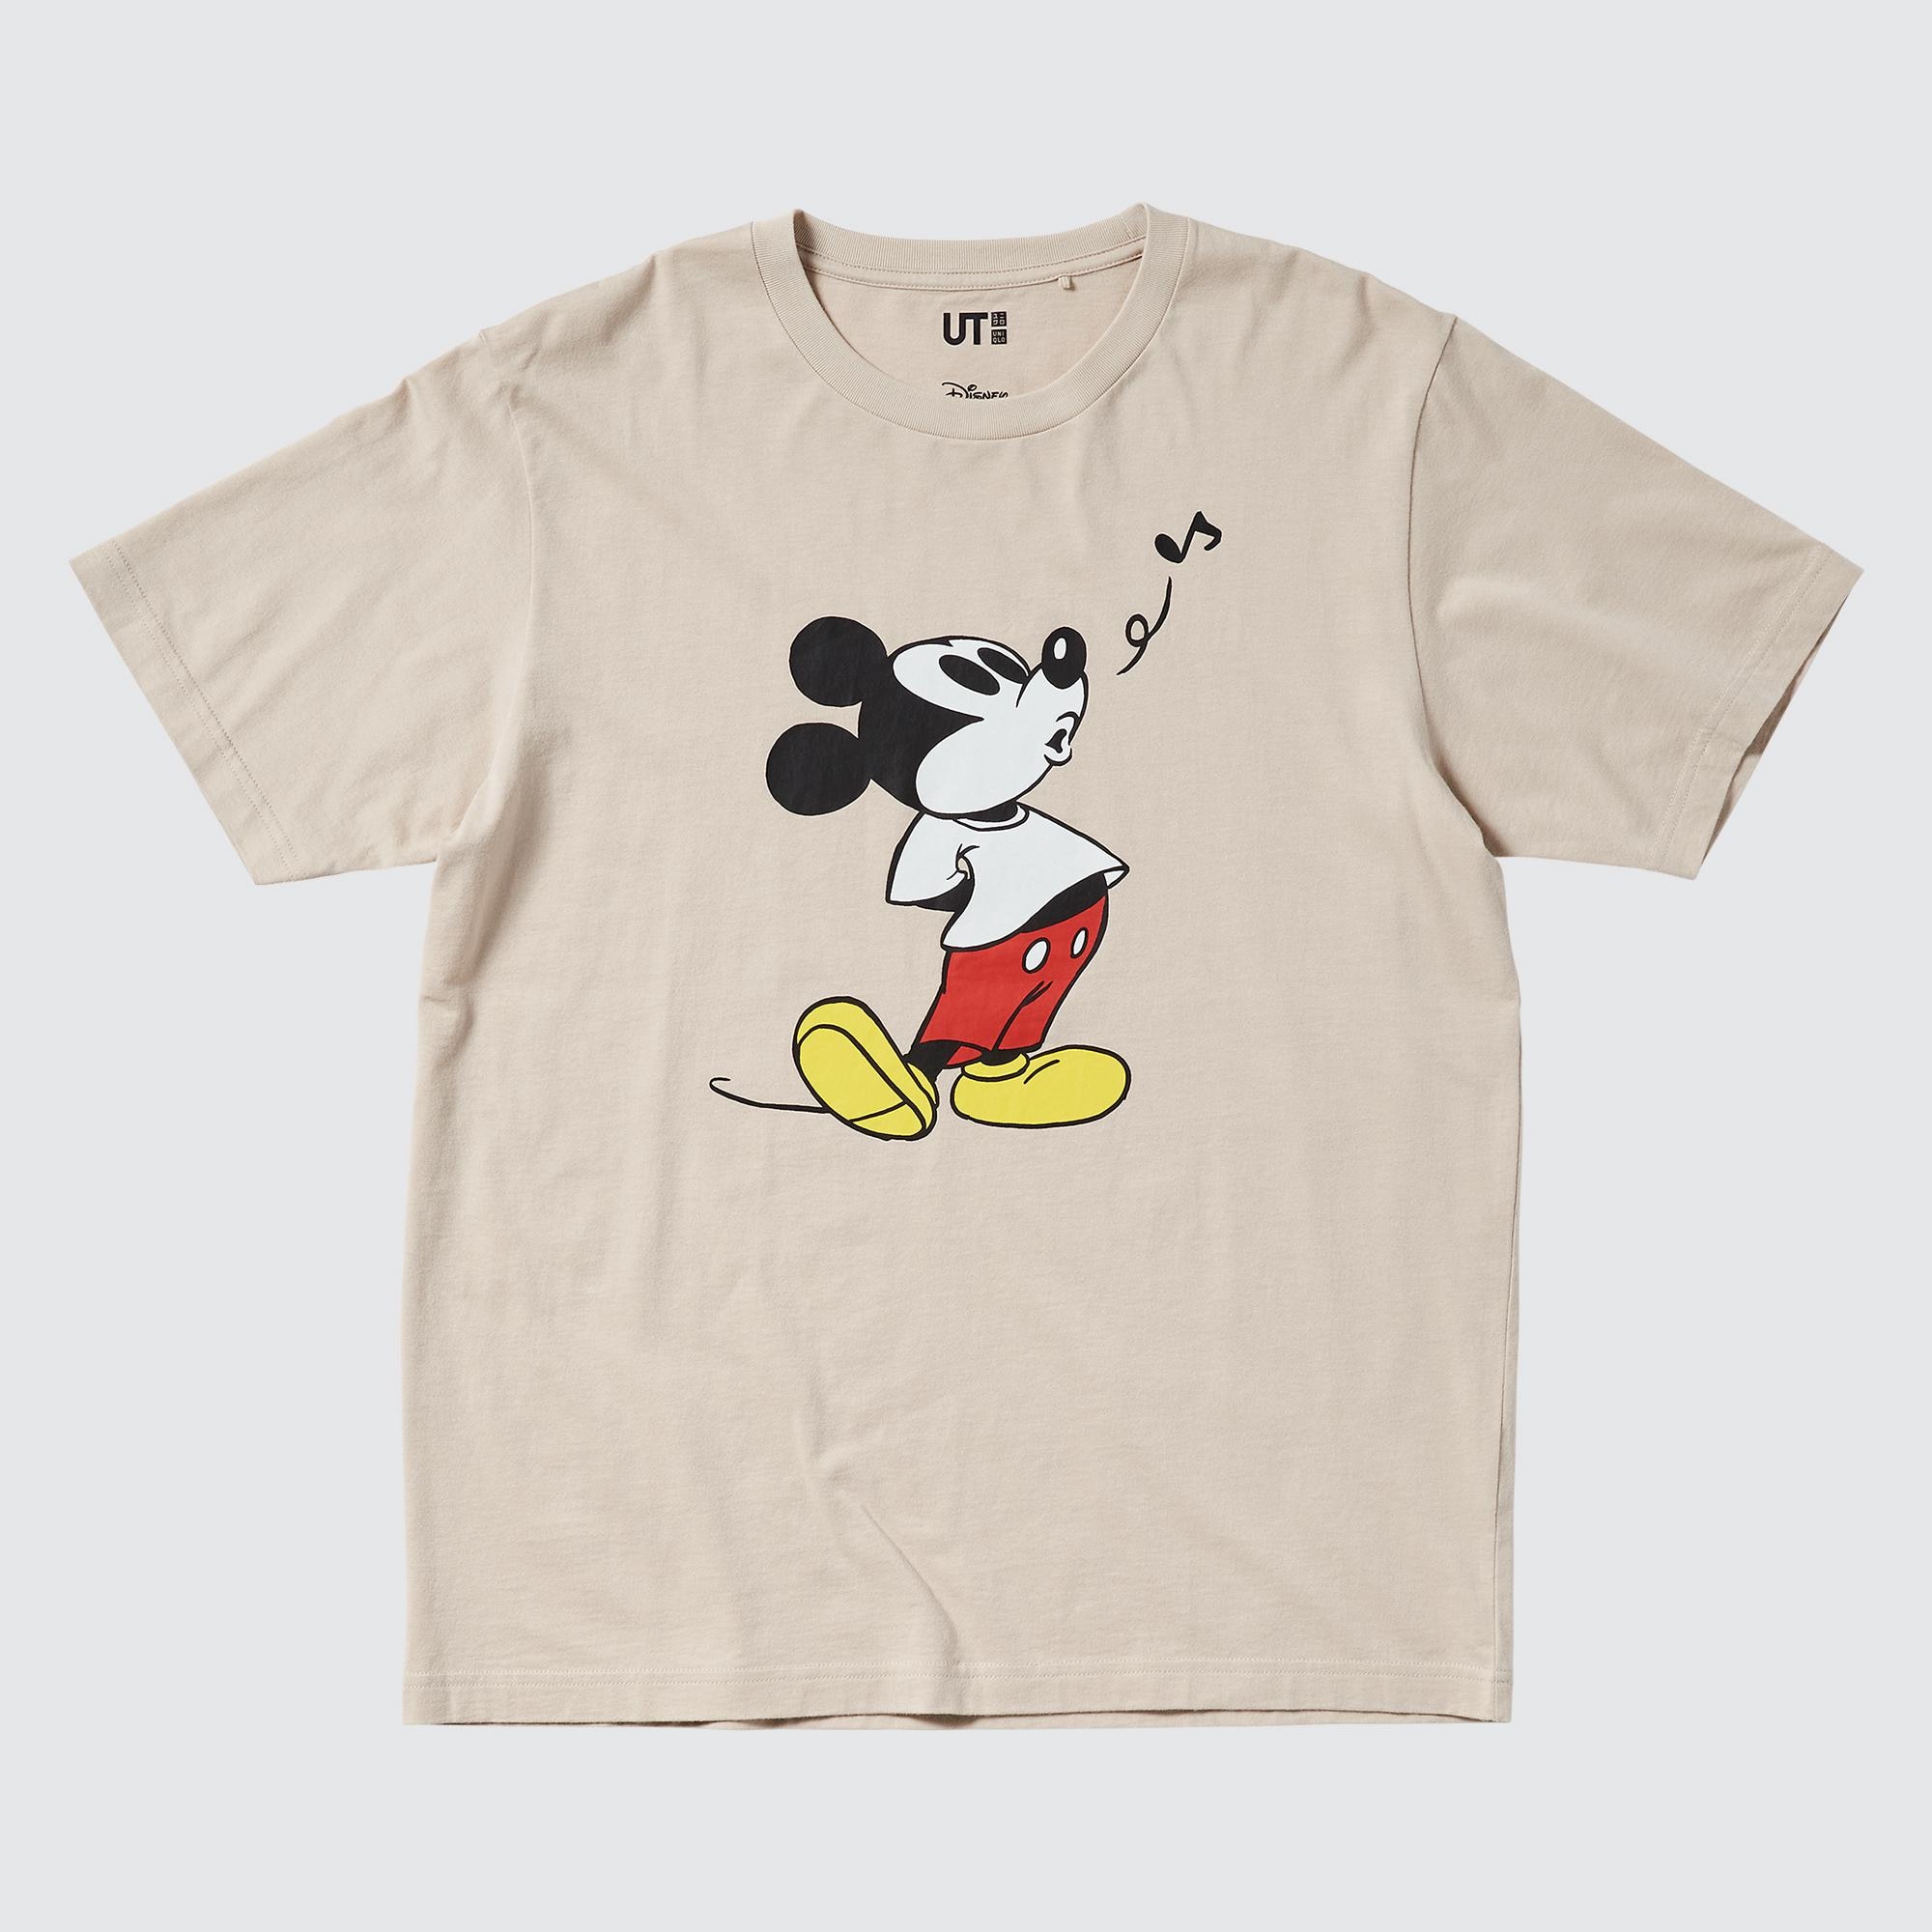 Uniqlo UT Mickey Stands Tees Coming to PH Official Details